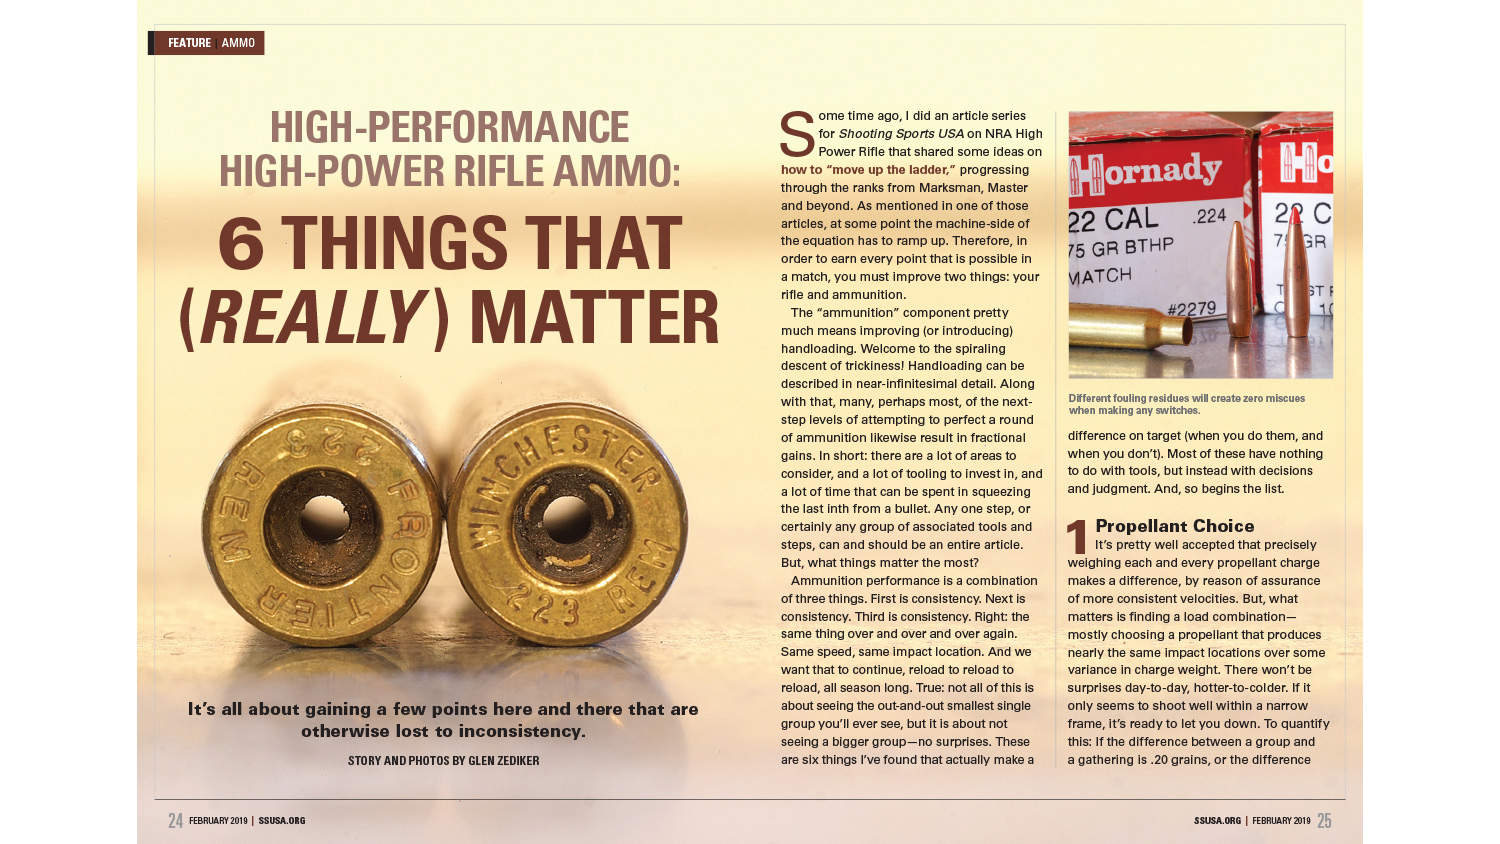 High-Performance High-Power Rifle Ammo | 6 Things That Really Matter